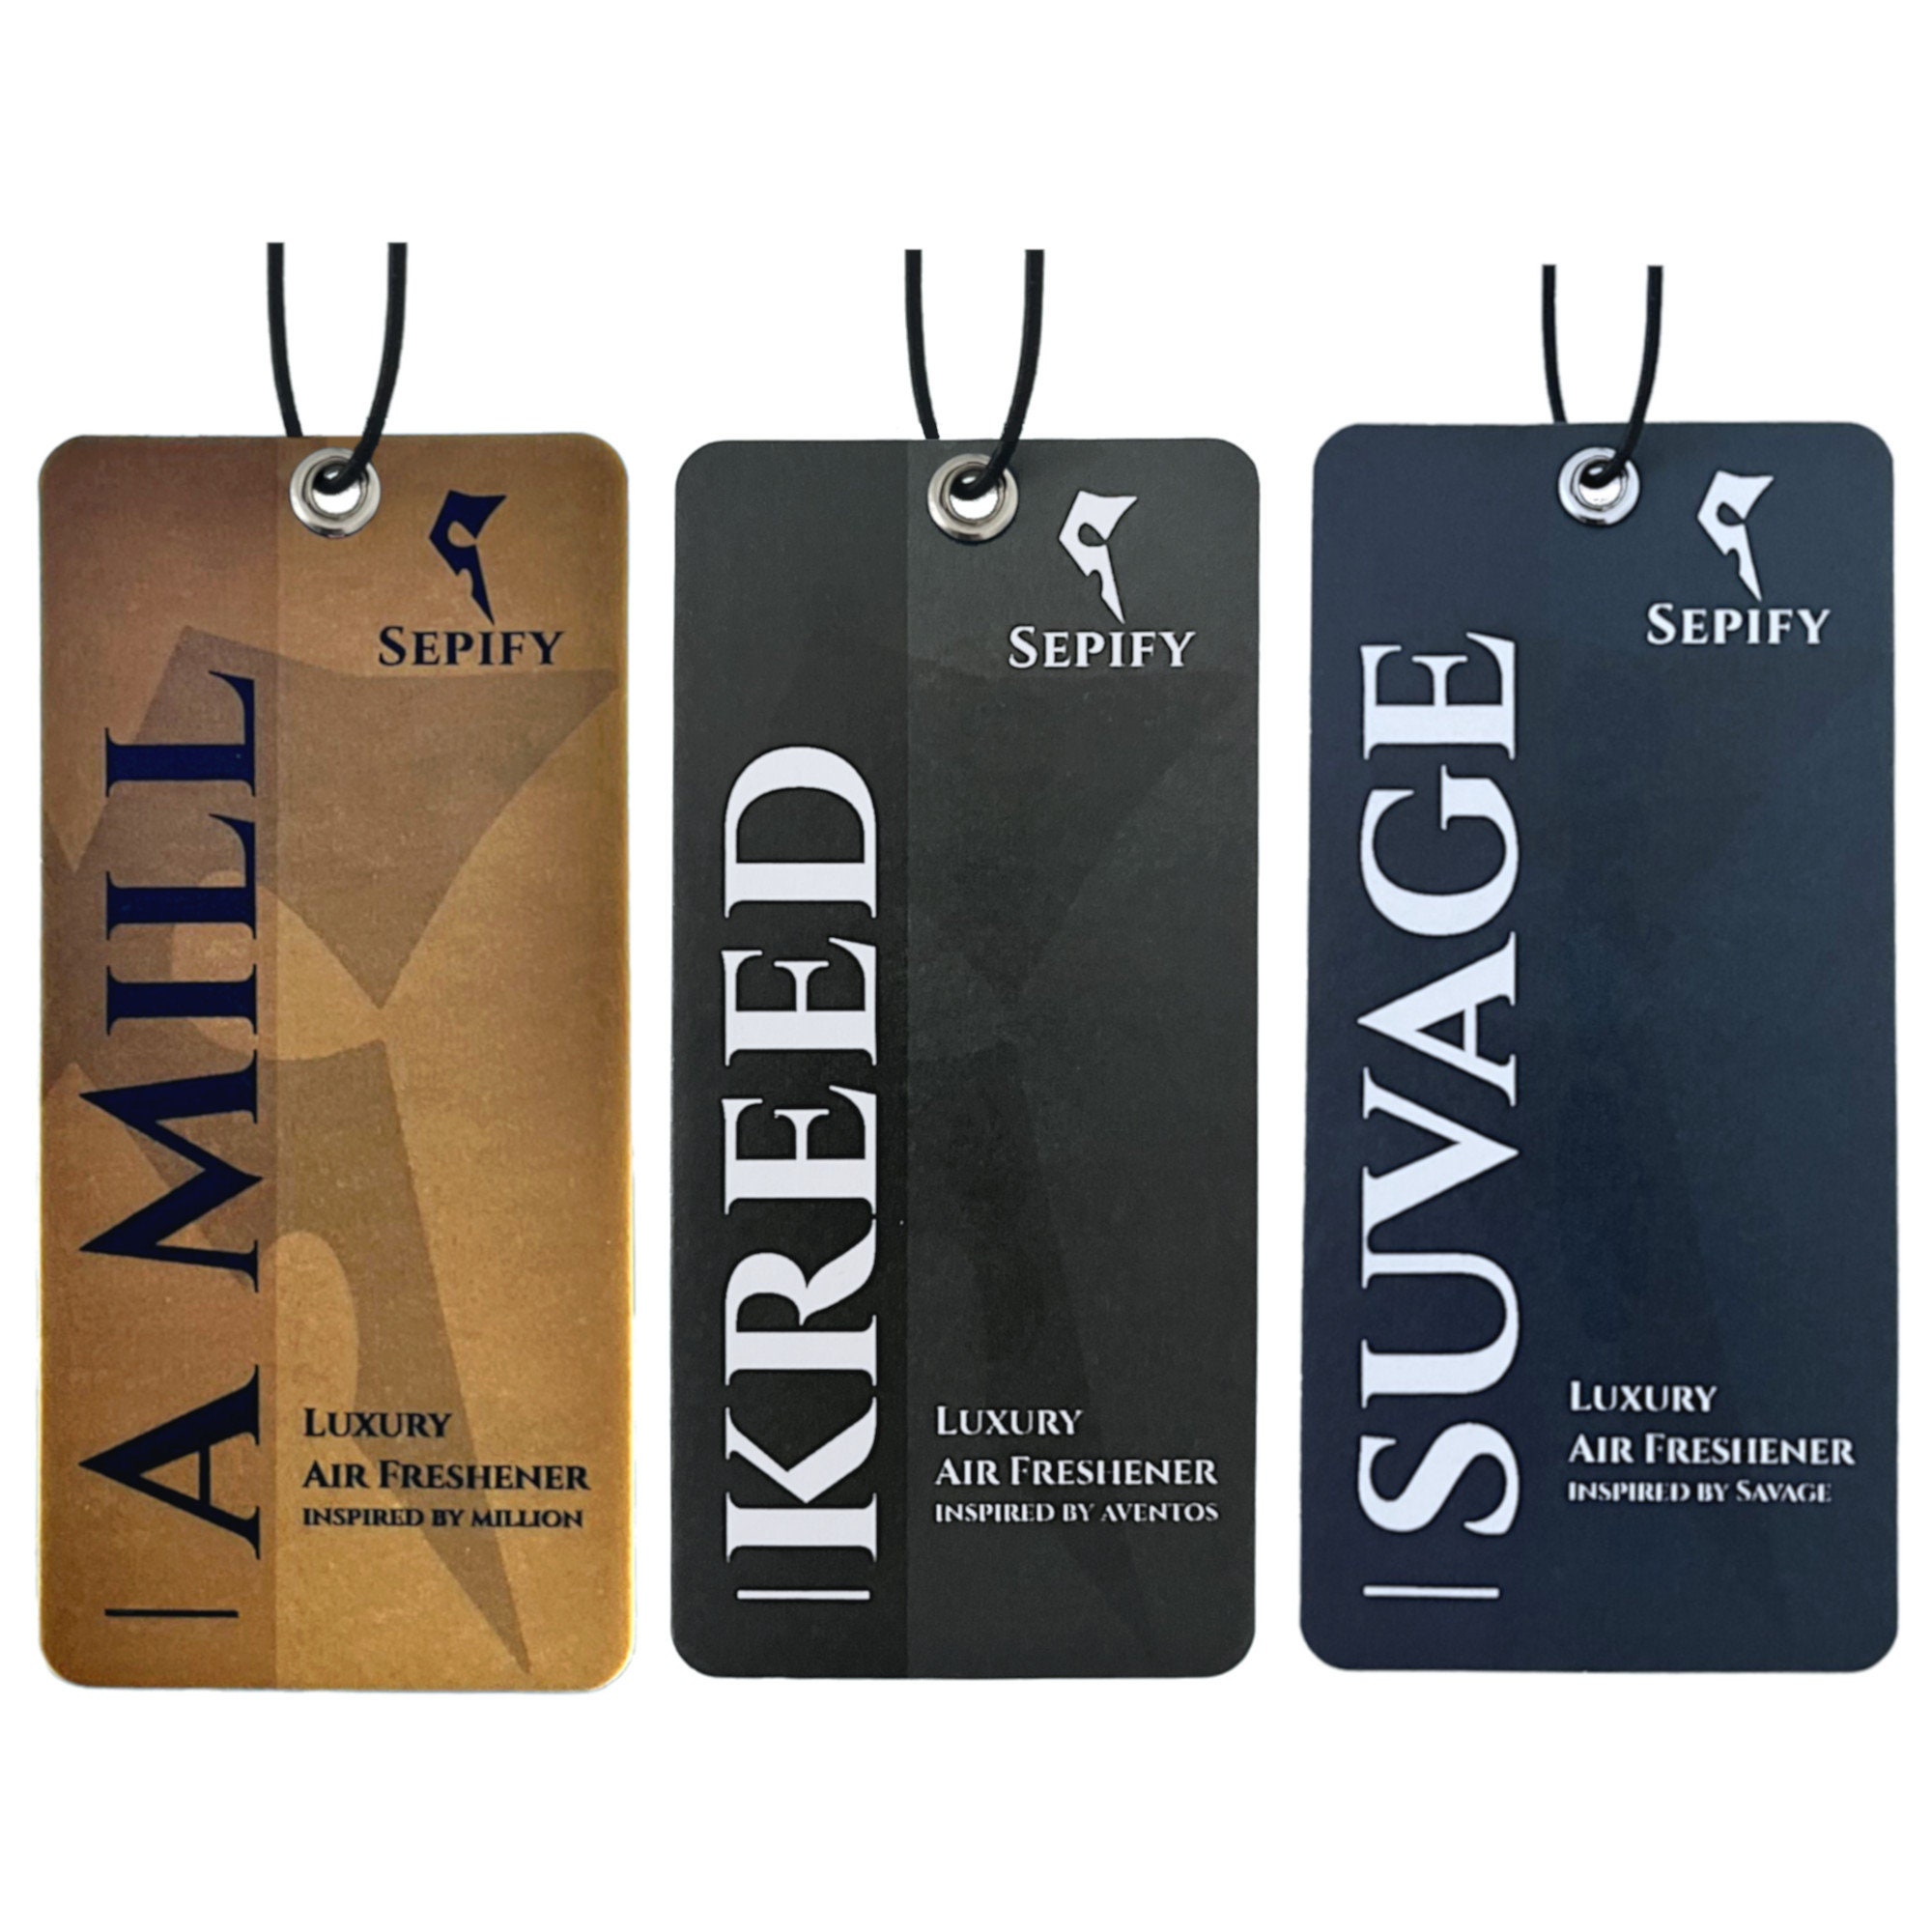 Sauvage Car Air Freshner - Up to 30% Off 